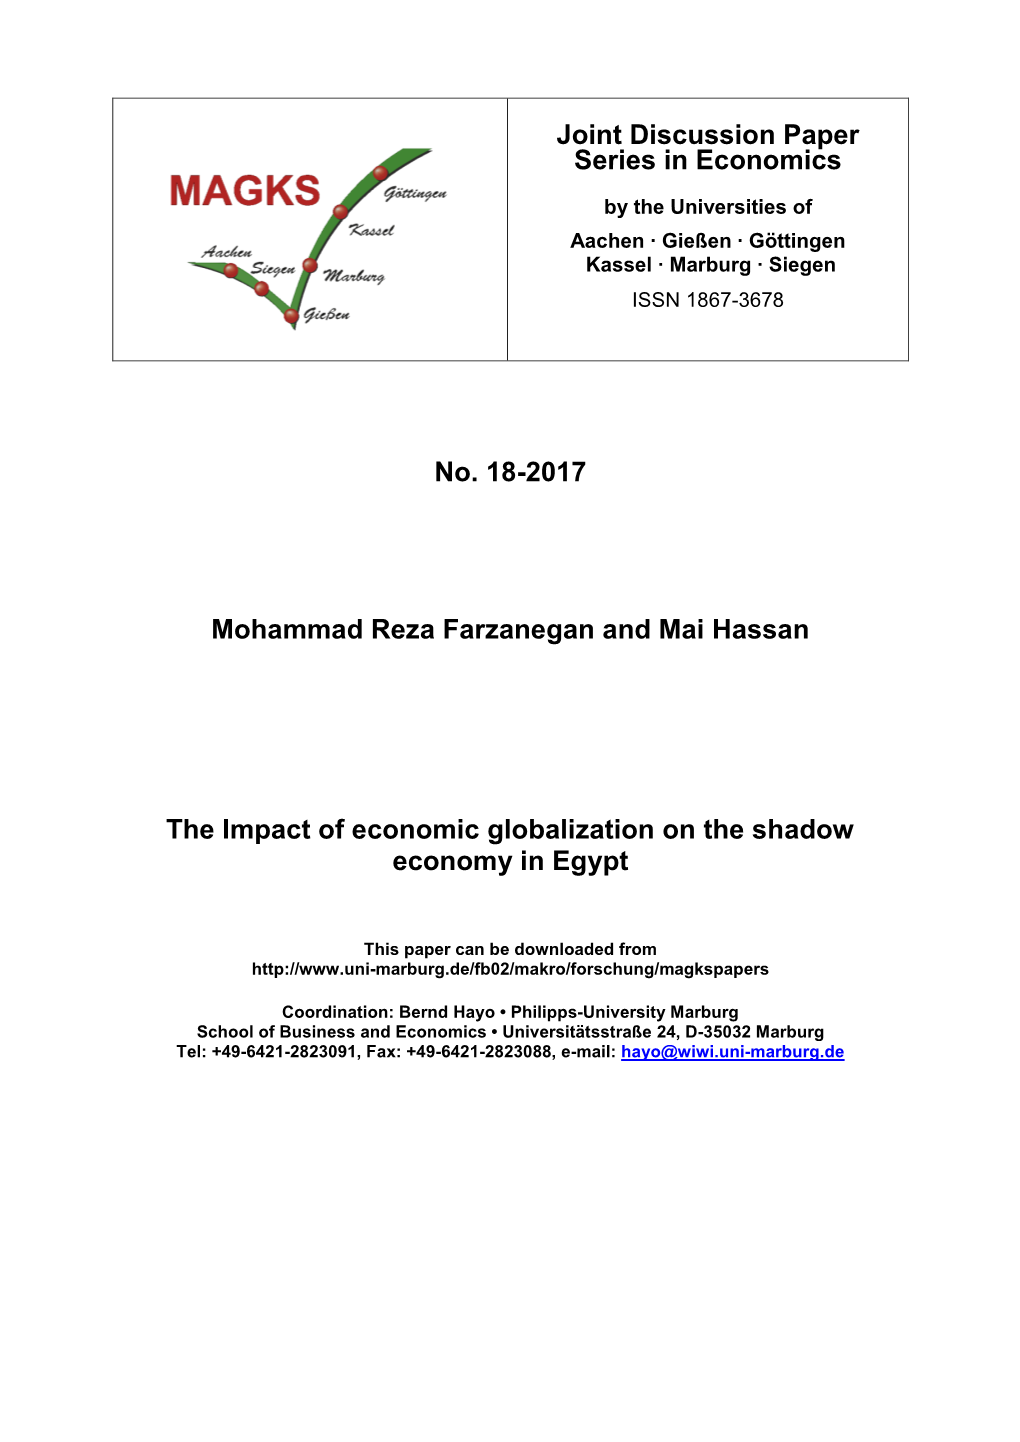 The Impact of Economic Globalization on the Shadow Economy in Egypt